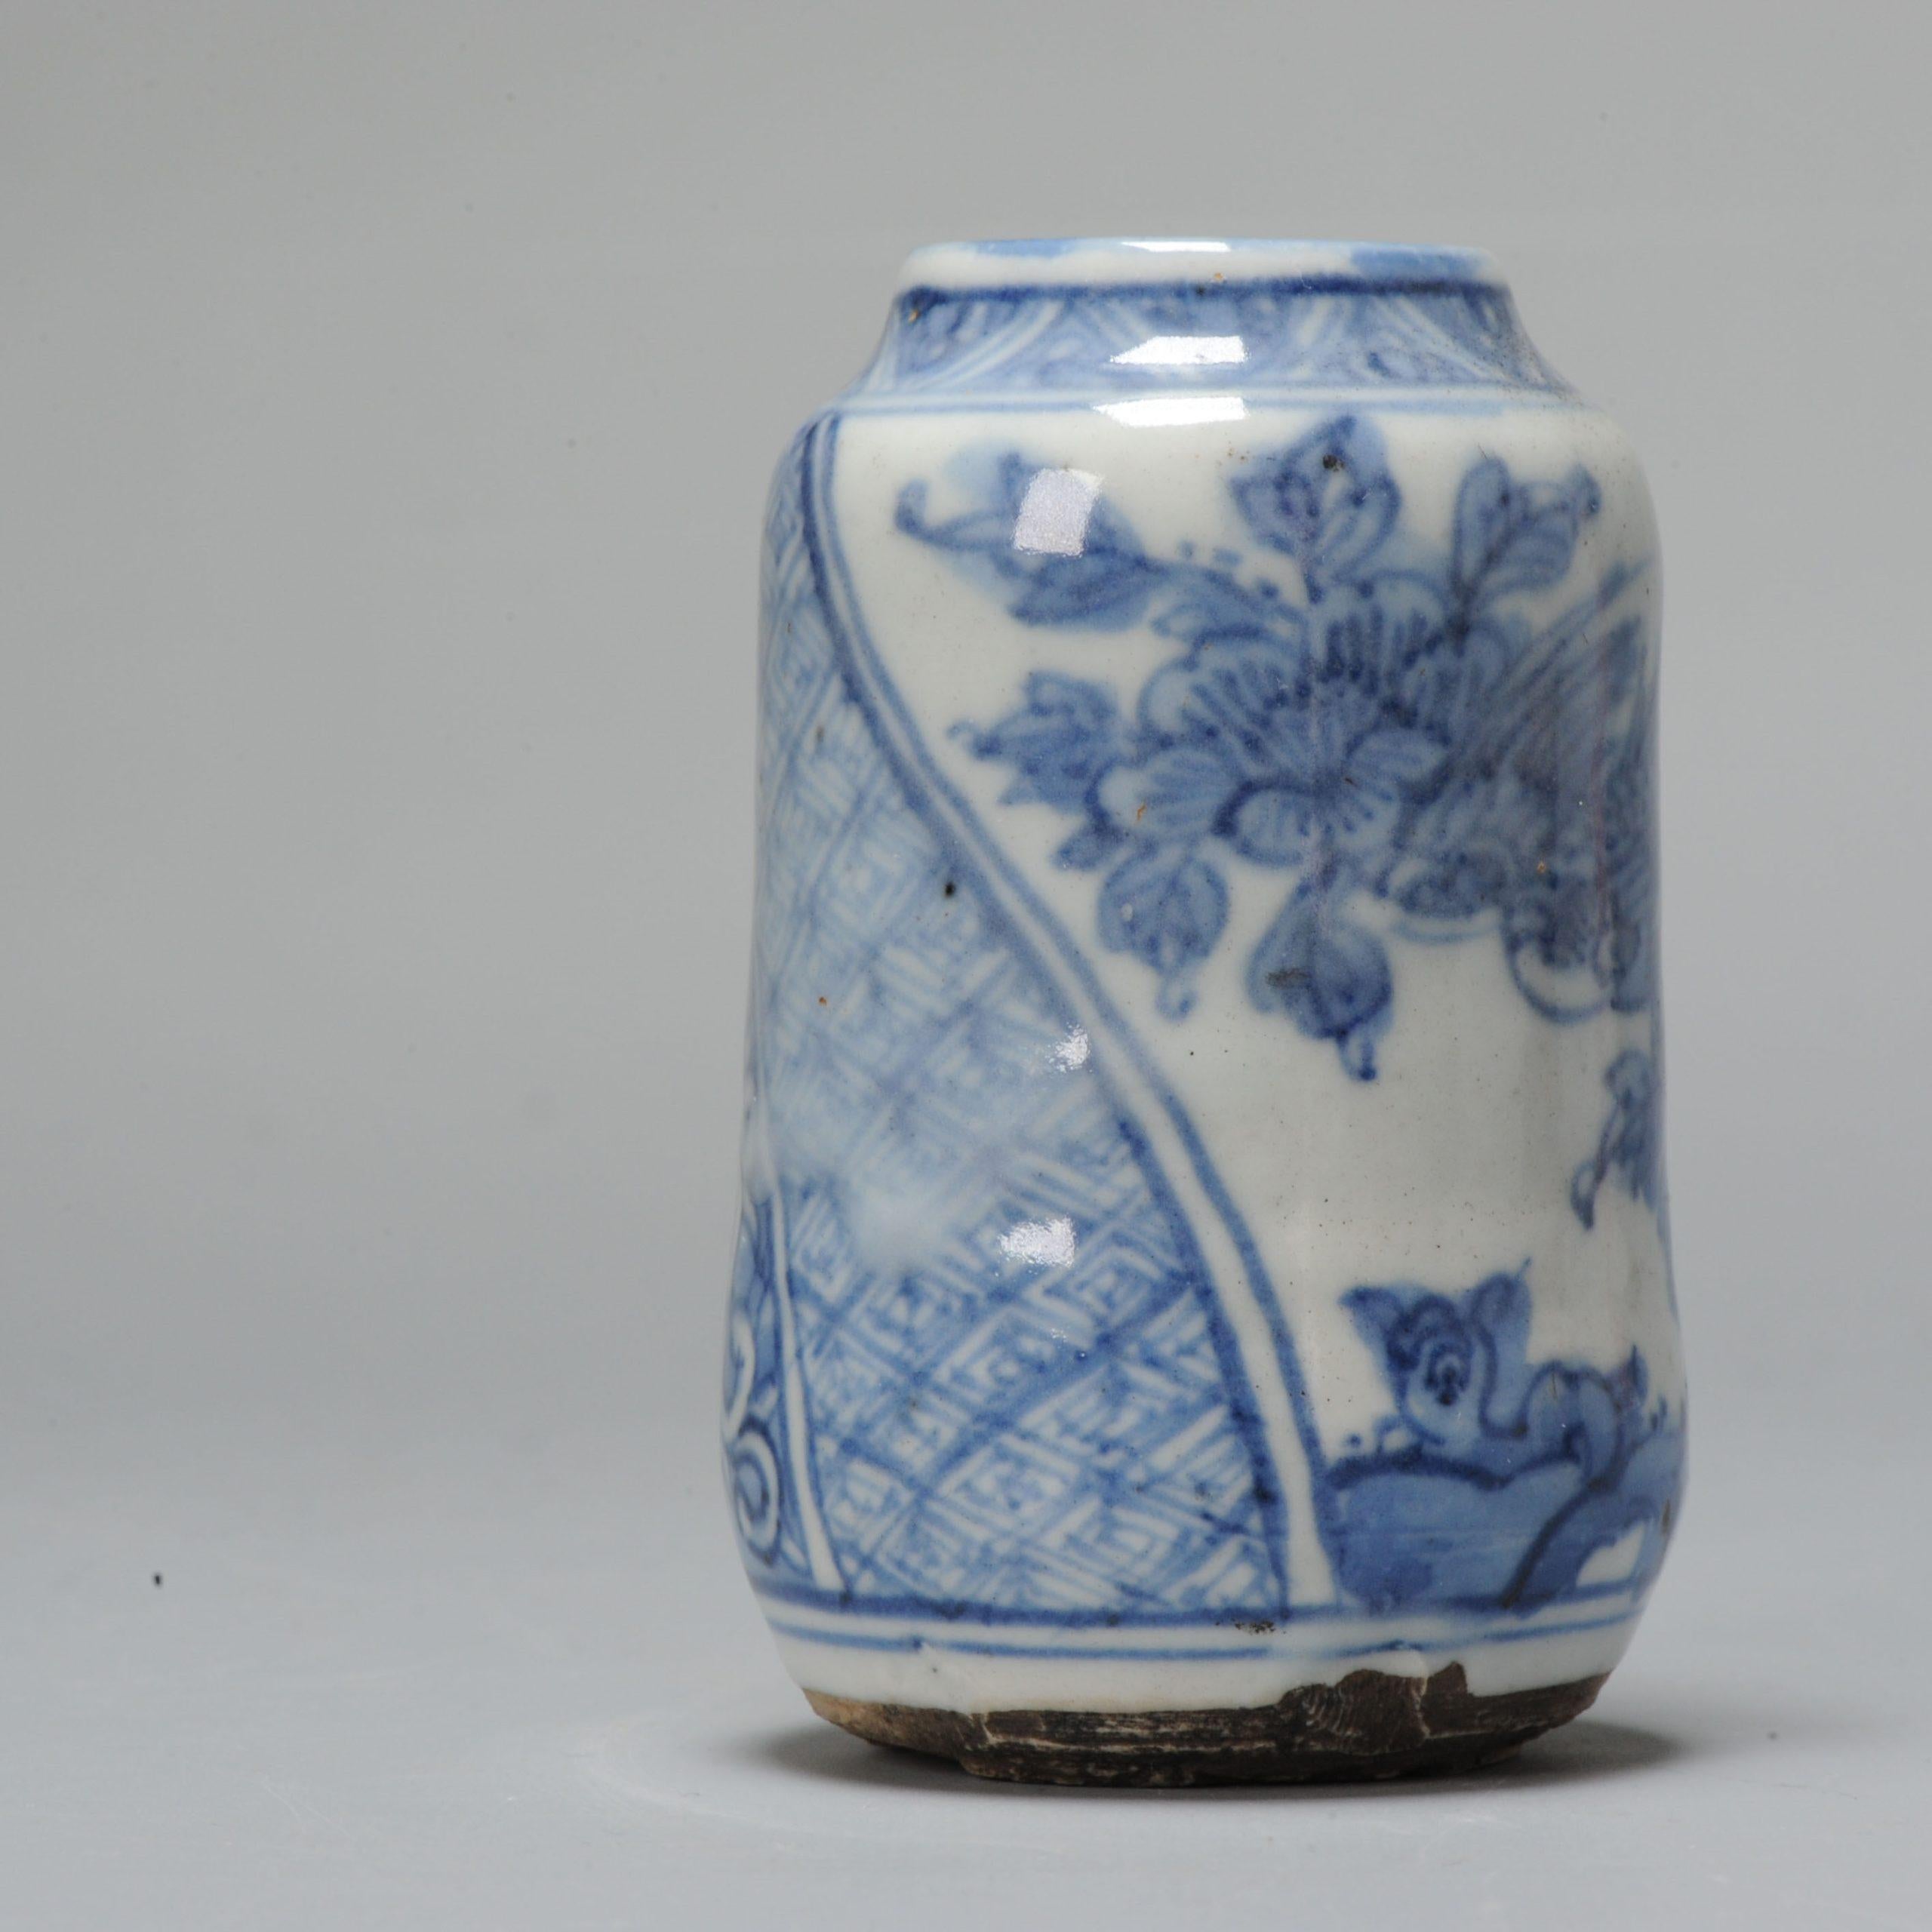 Amazing Lidded small incense or tea jar from the Edo period. Very nicely potted and with a lovely ongoing scene. Decorated with in Shonzui style.

Additional information:
Material: Porcelain & Pottery
Region of Origin: Japan
Period: 17th century Edo